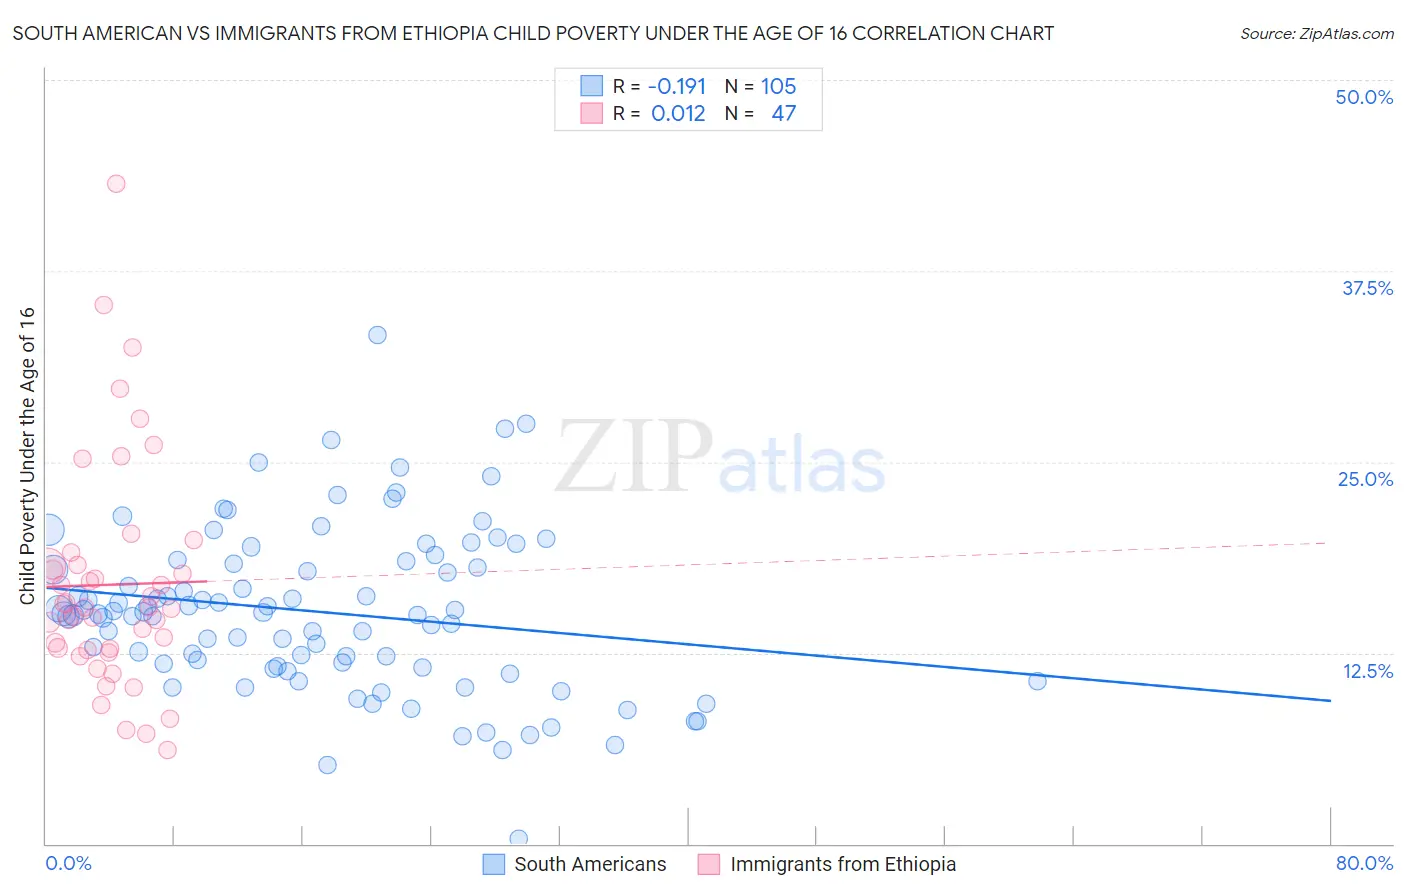 South American vs Immigrants from Ethiopia Child Poverty Under the Age of 16